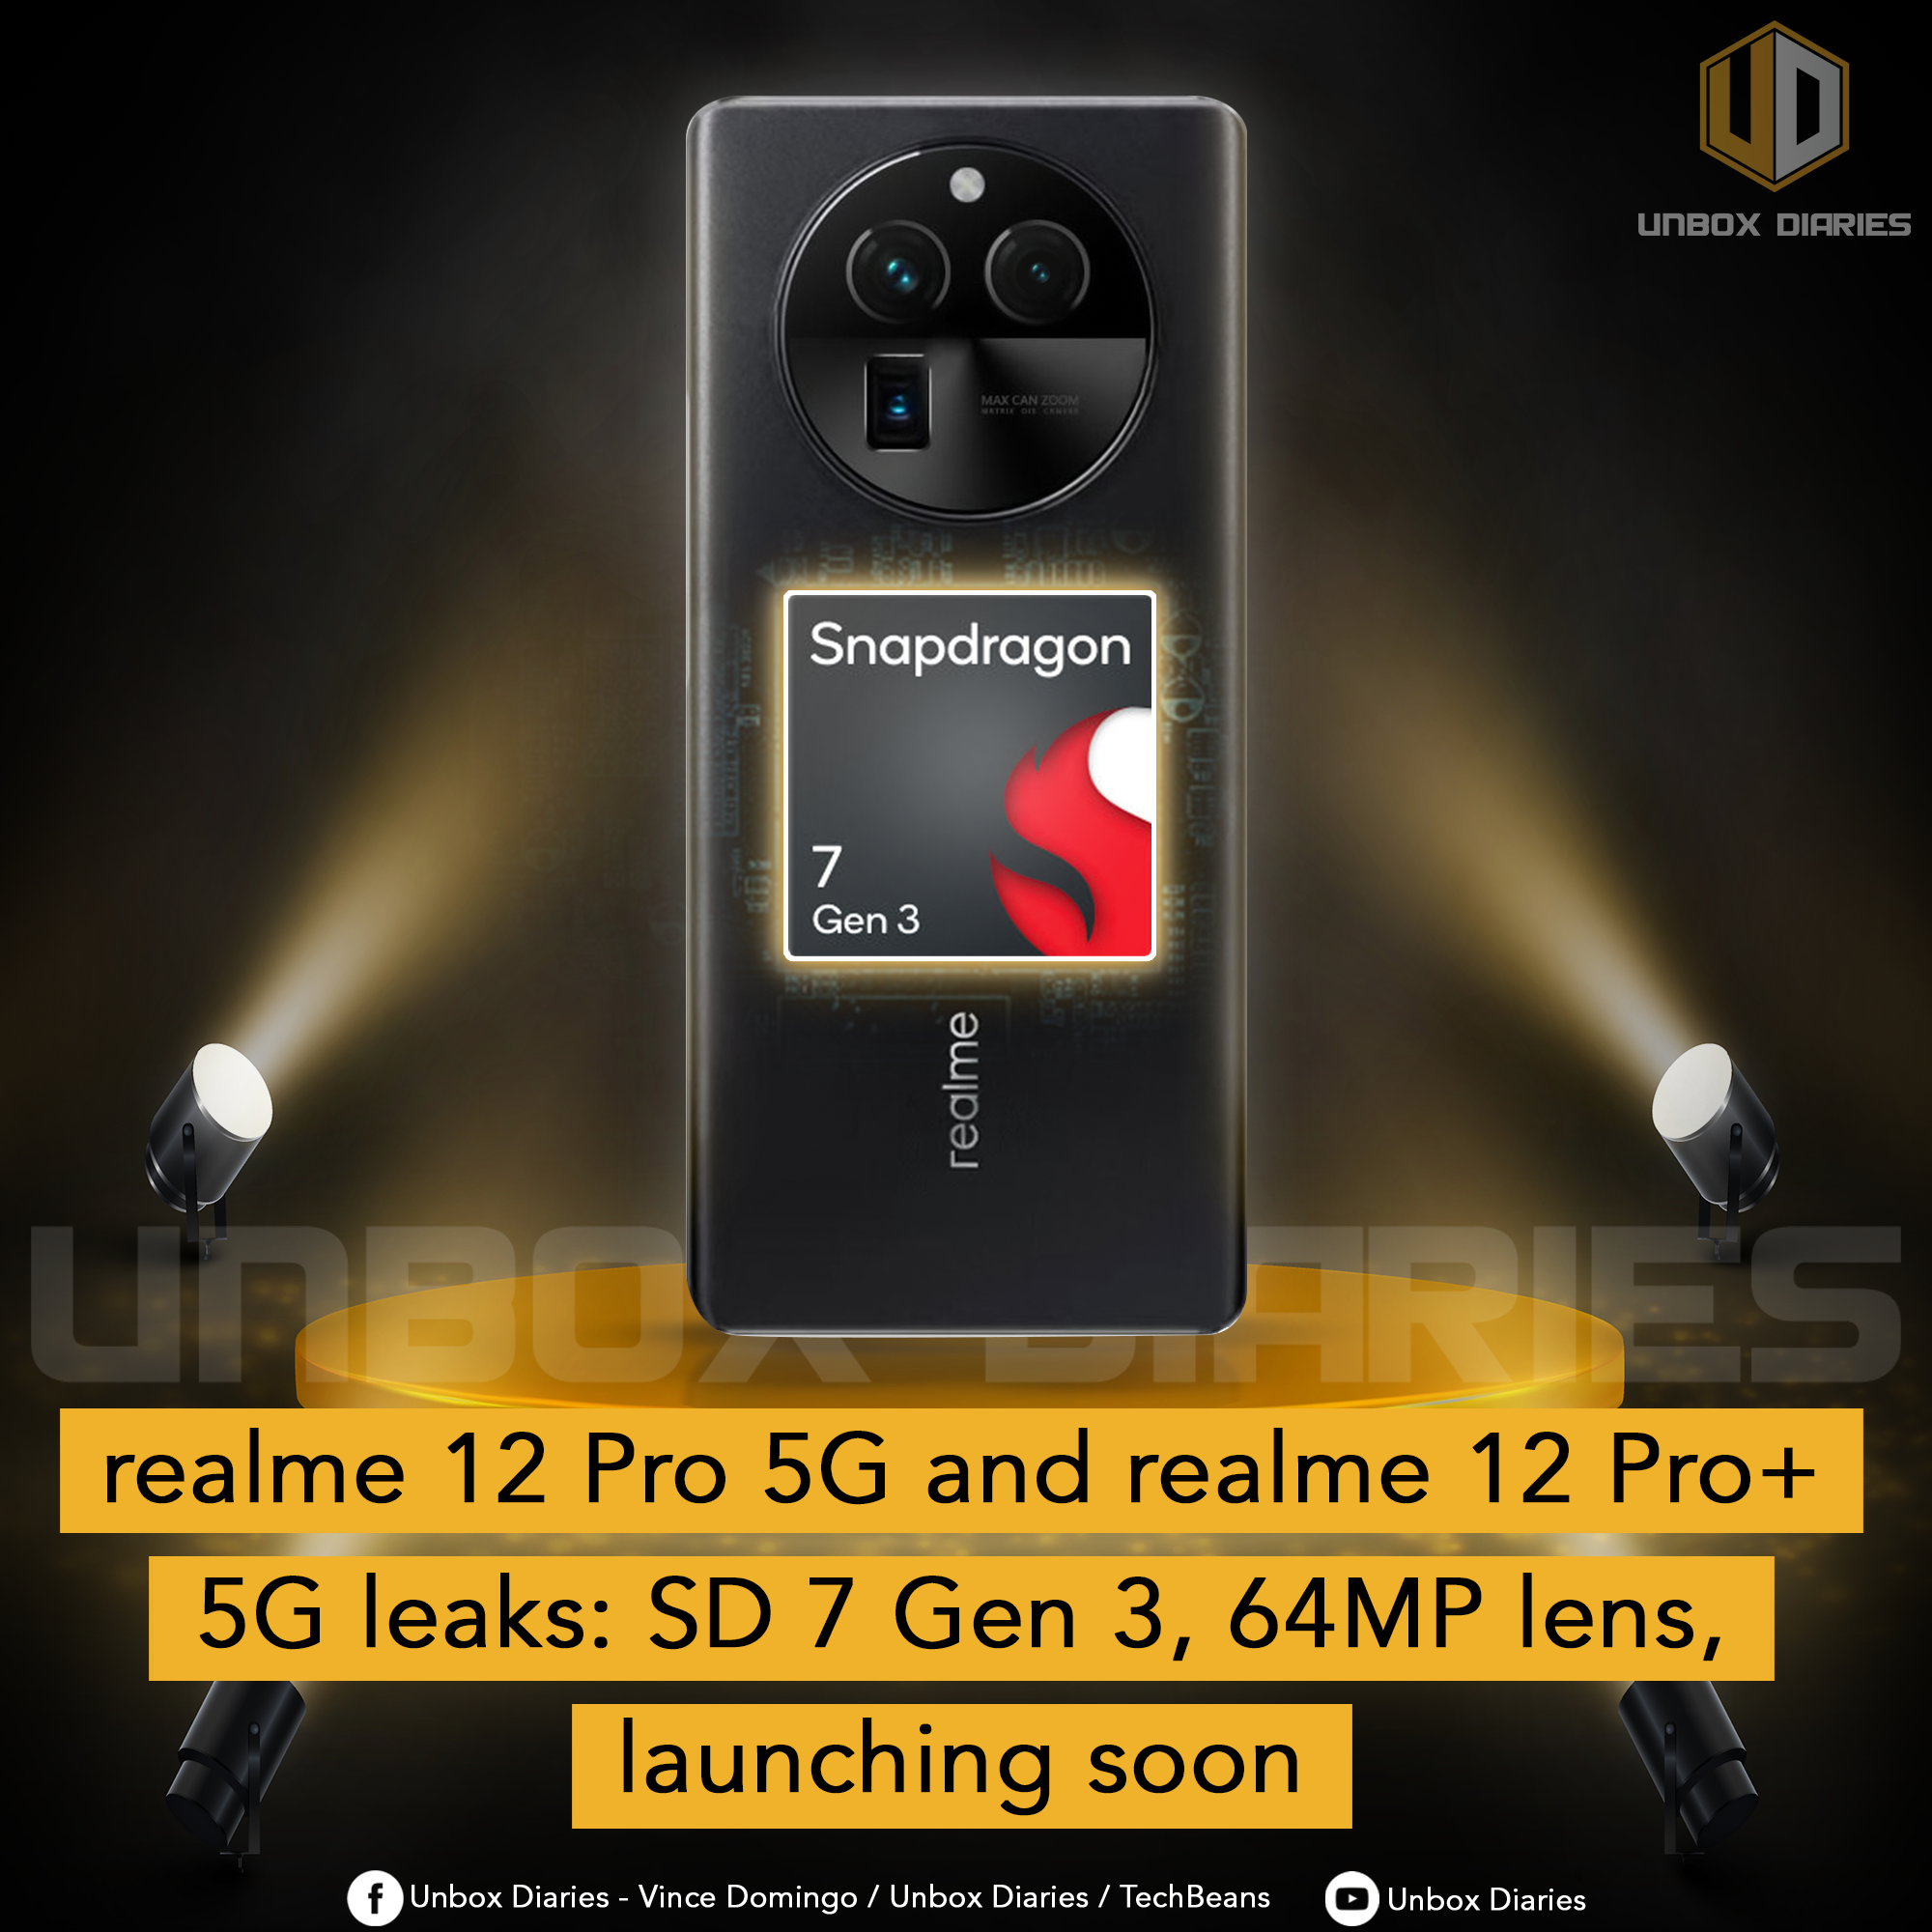 realme 12 Pro 5G and realme 12 Pro+ 5G leaks: SD 7 Gen 3, 64MP lens,  launching soon - Unbox Diaries